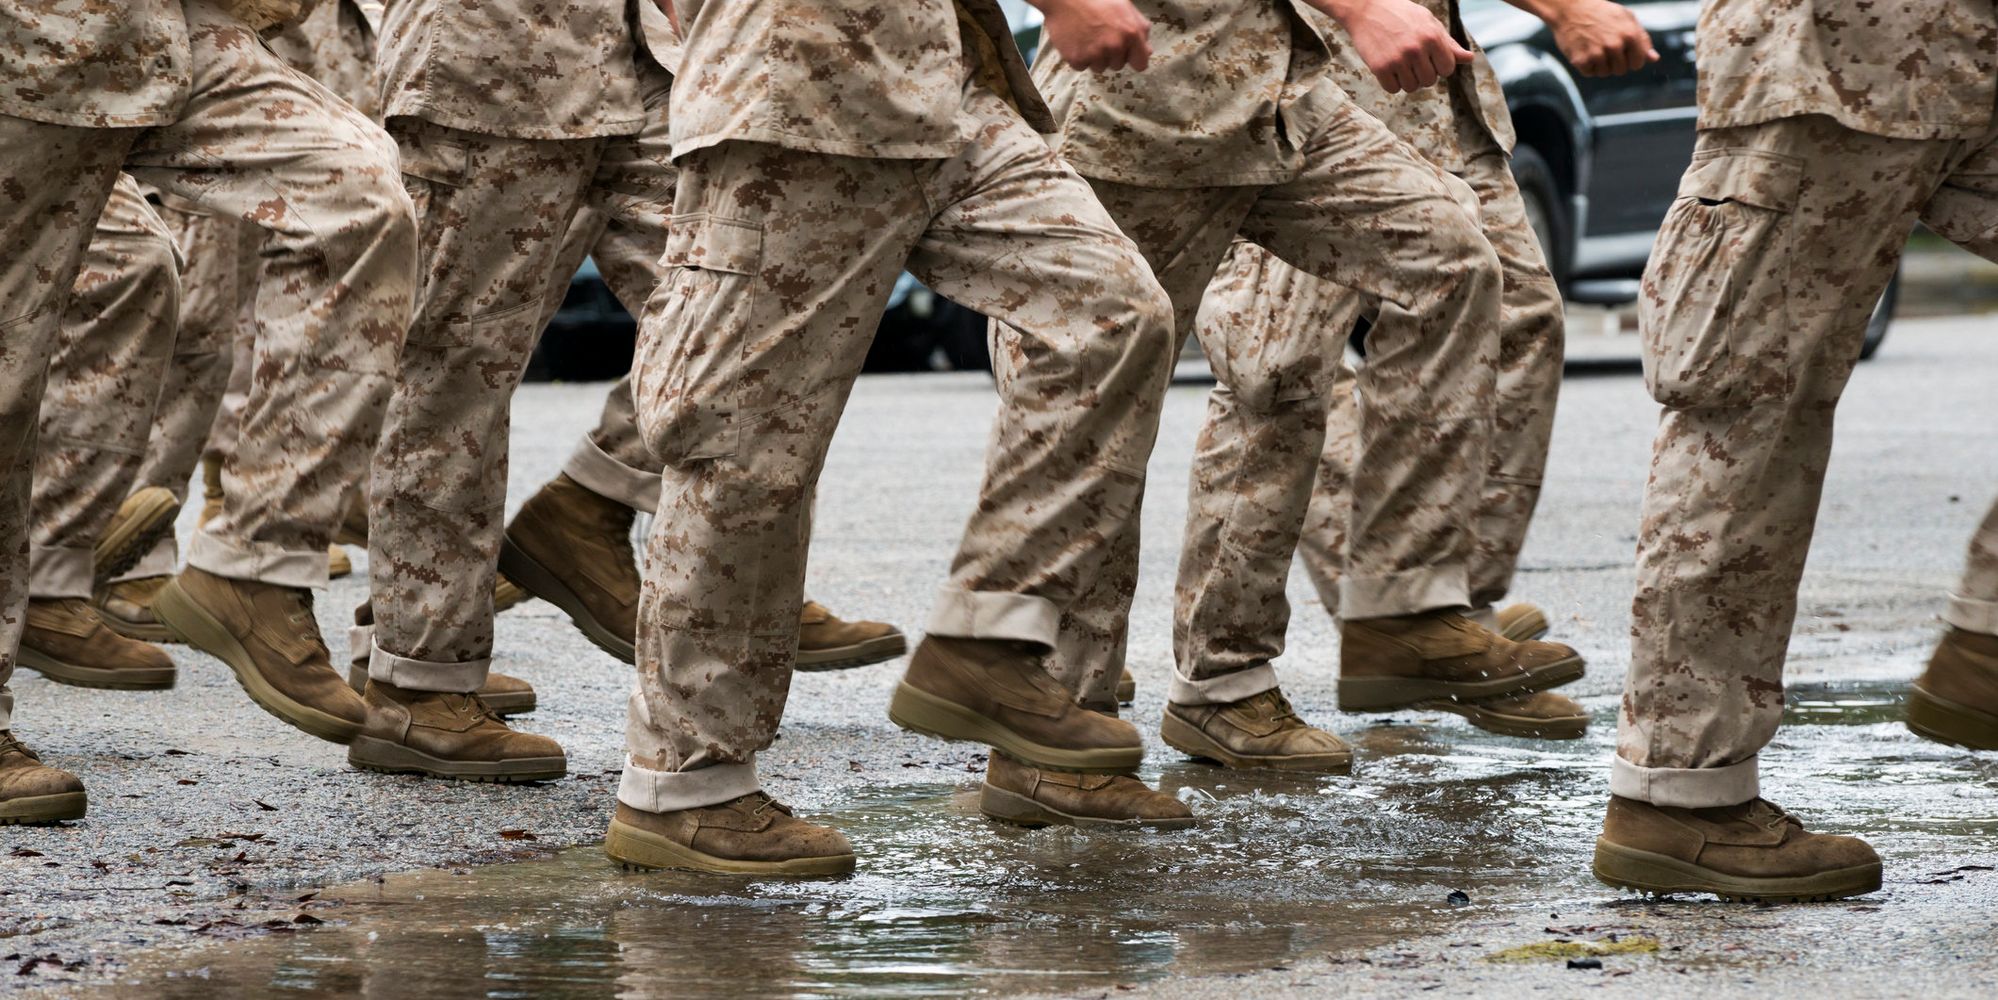 Marines Nude Photo Scandal Goes Beyond That One Facebook Group